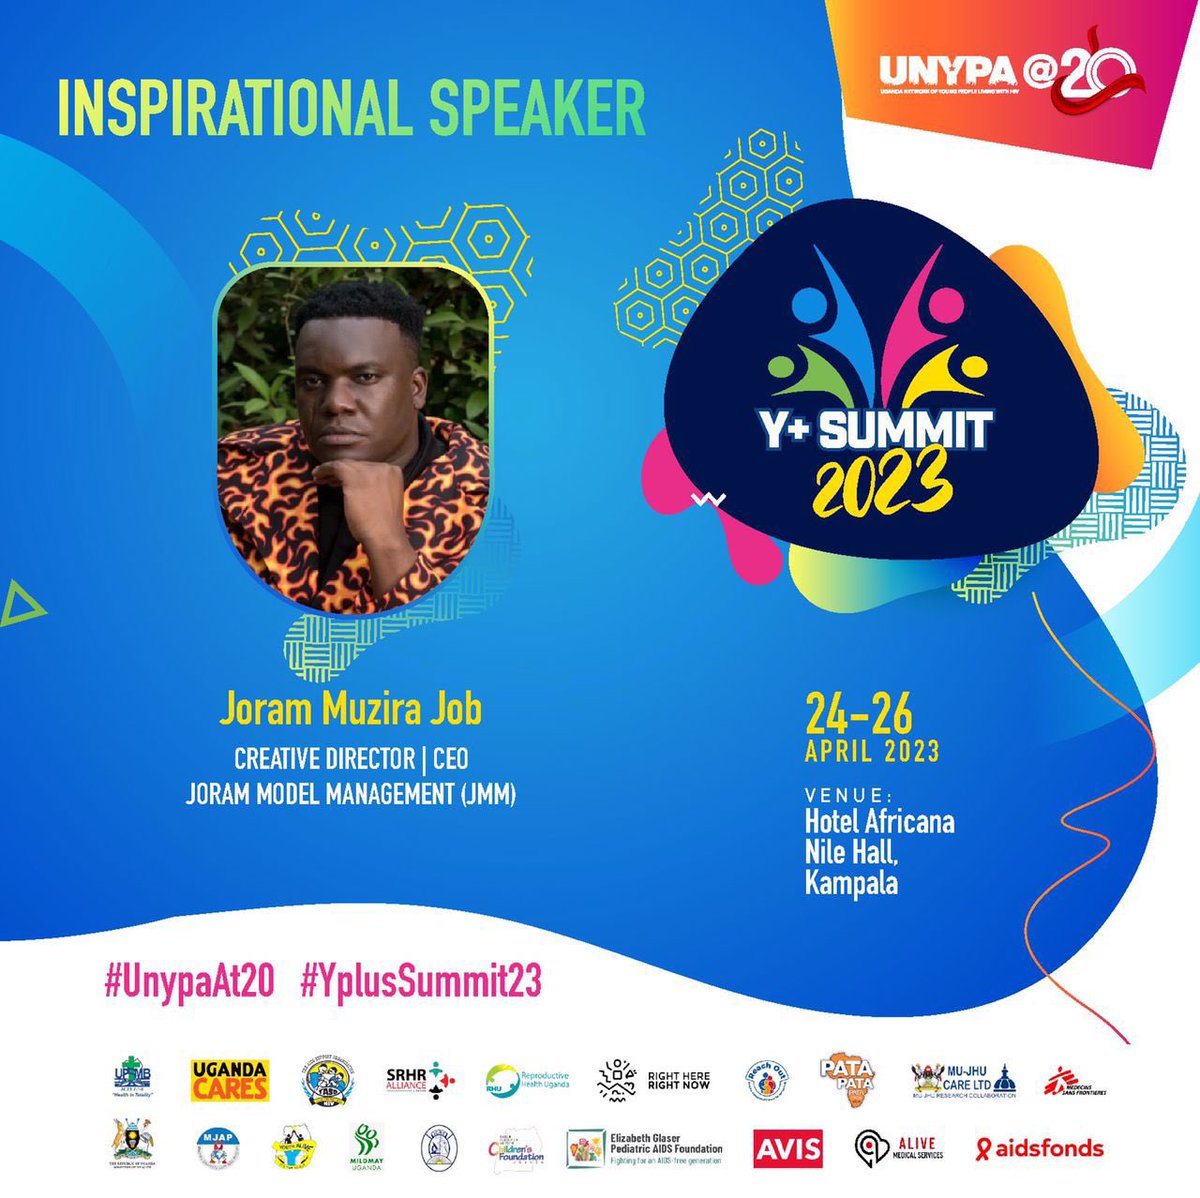 Today the day 2 of the #YPlusSummit #UnypaAt20